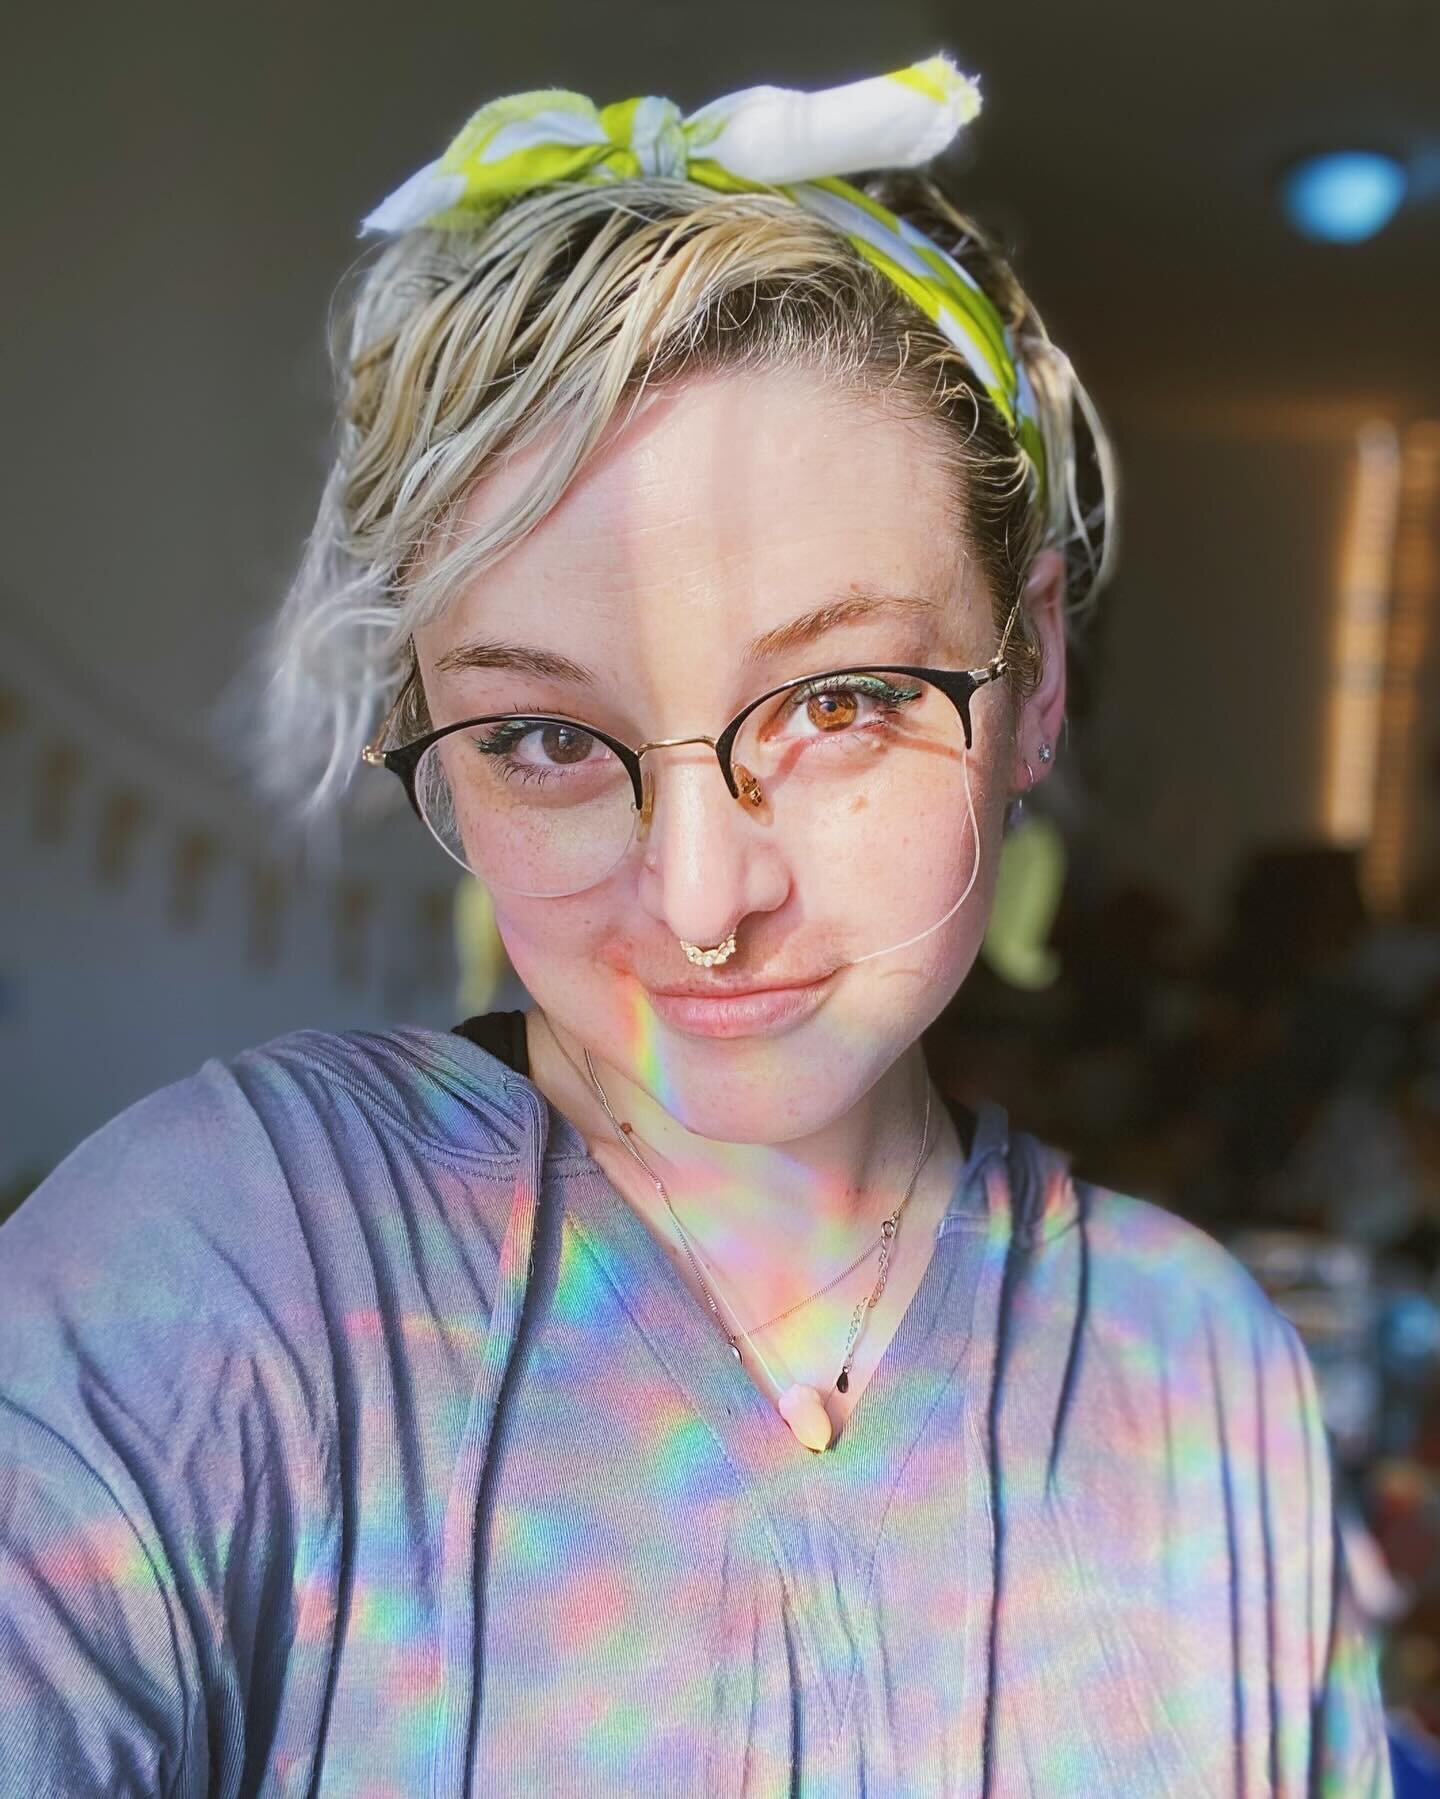 When you felt cute, and didn't realize you're actually in more of a hot-mess phase....🌛
.
Welp, guess it's time for new glasses 🙃 one-eyed looking at you @phillyeyeworks 💙
.
....also I really just thought the lens was very clean 🤦🏼✨
.
.
.
#ohwel